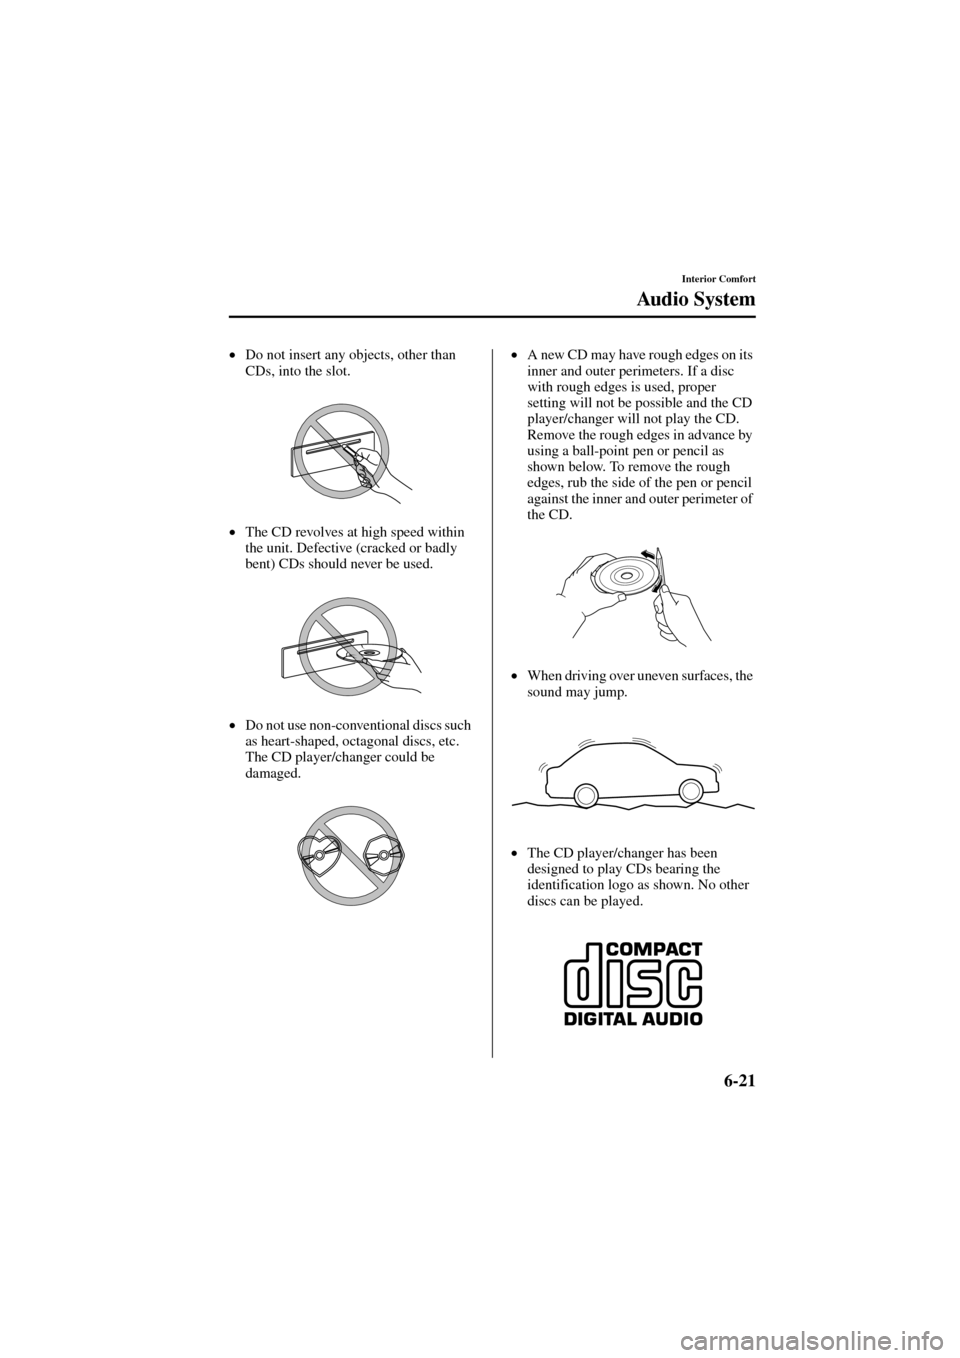 MAZDA MODEL 6 2004  Owners Manual (in English) 6-21
Interior Comfort
Au d i o  S y s t e m
Form No. 8R29-EA-02I
•
Do not insert any objects, other than 
CDs, into the slot.
•
The CD revolves at high speed within 
the unit. Defective (cracked o